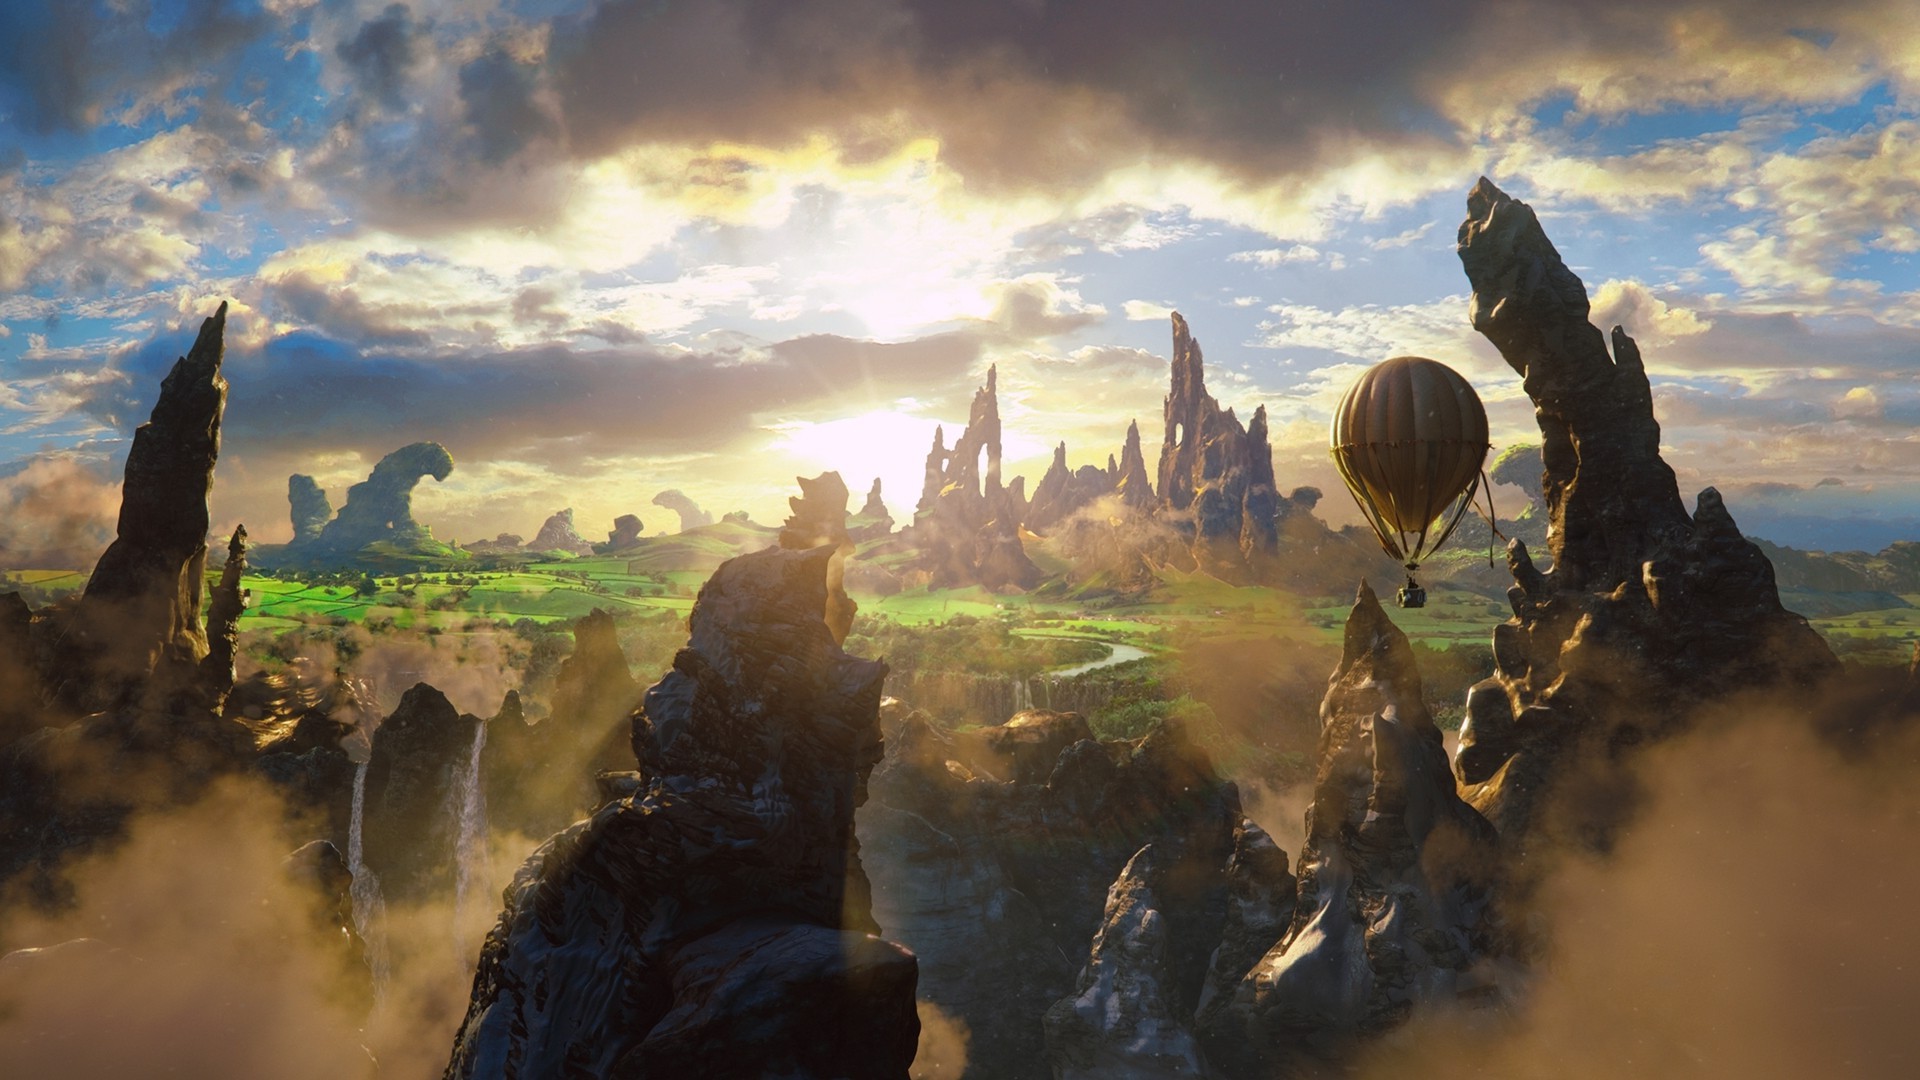 Oz The Great And Powerful Fantasy - HD Wallpaper 